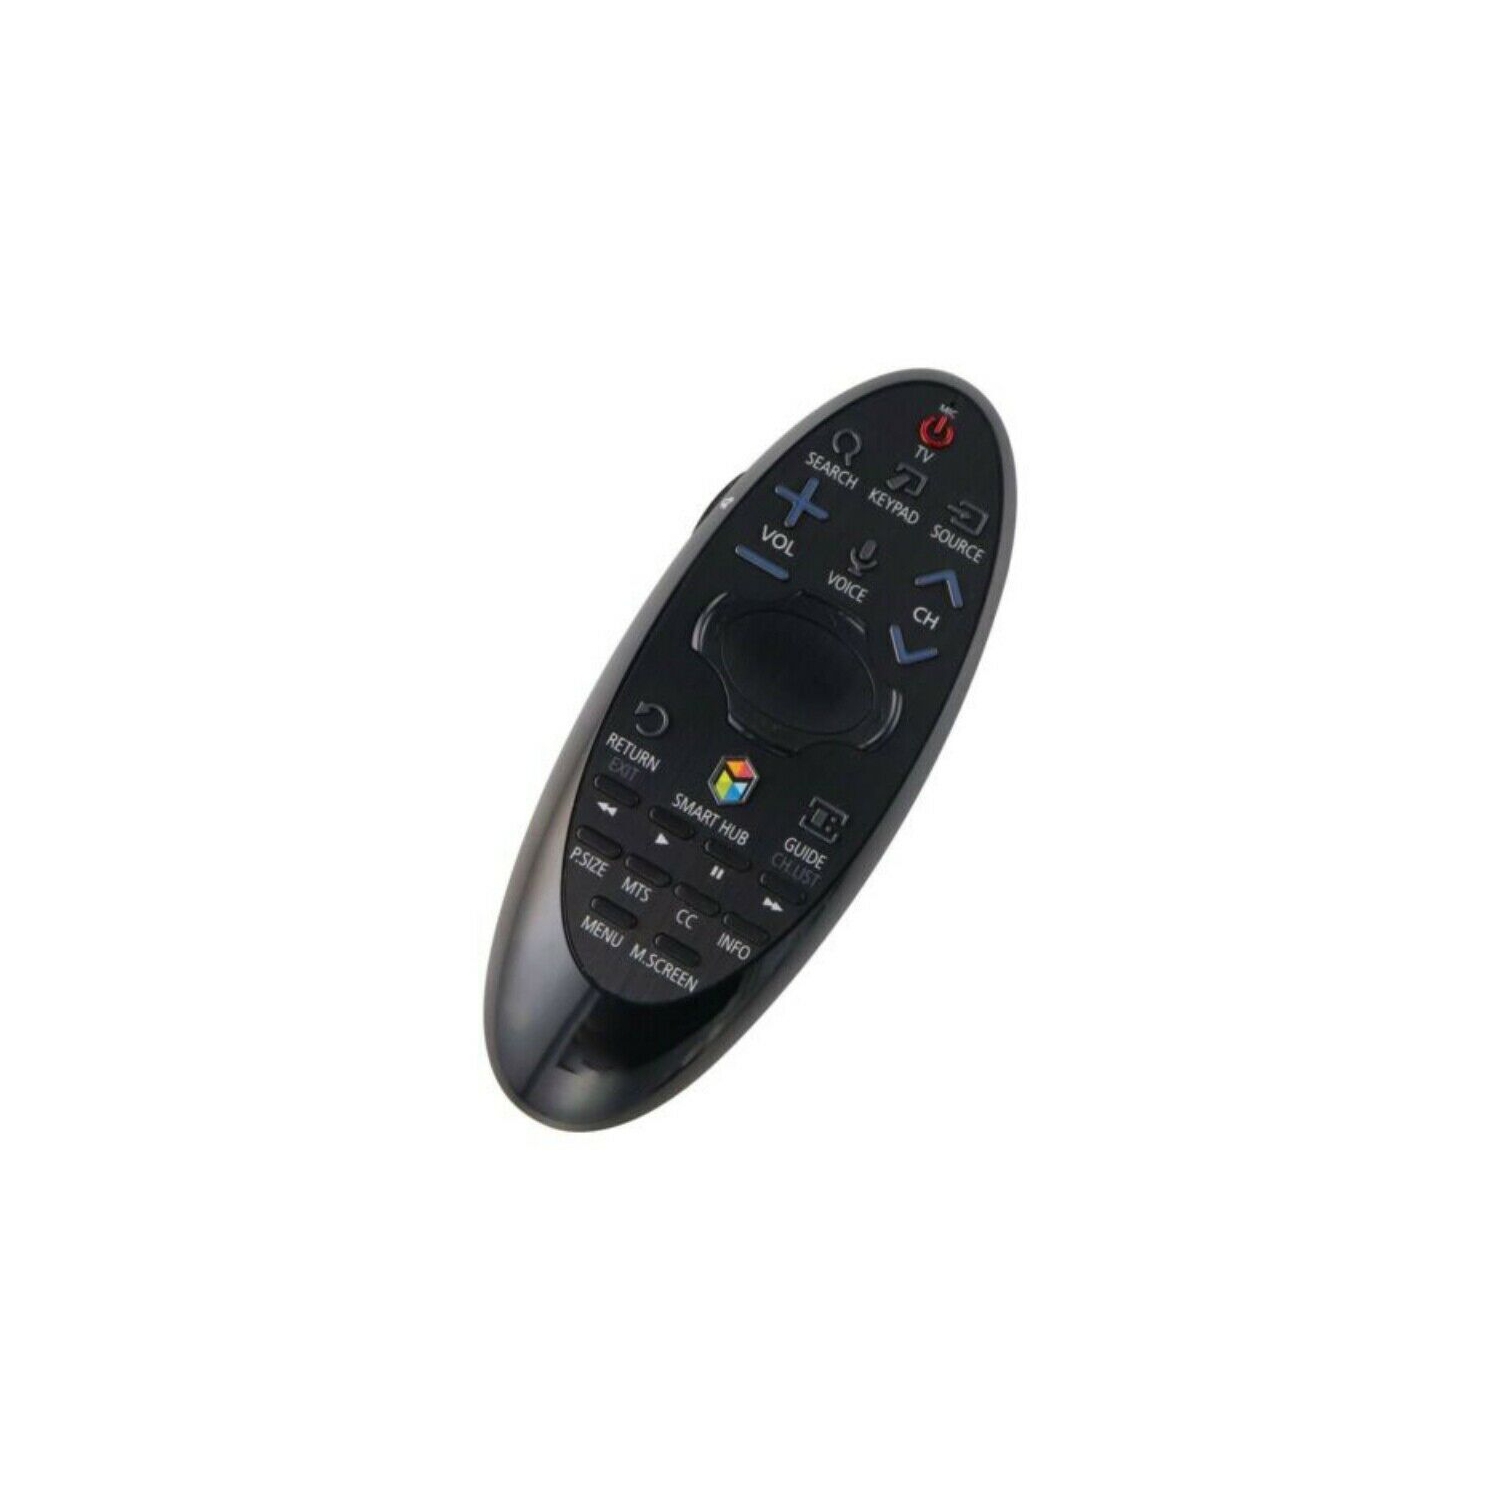 Universal TV Remote Control for LG Brand 2 in to 1, Multi Function TV Remote Controller for RBN59 to 01185F/BN59 to 01185D/BN59 to 01182D/BN59 to 01181D/BN94 Samsung BN59-01185F